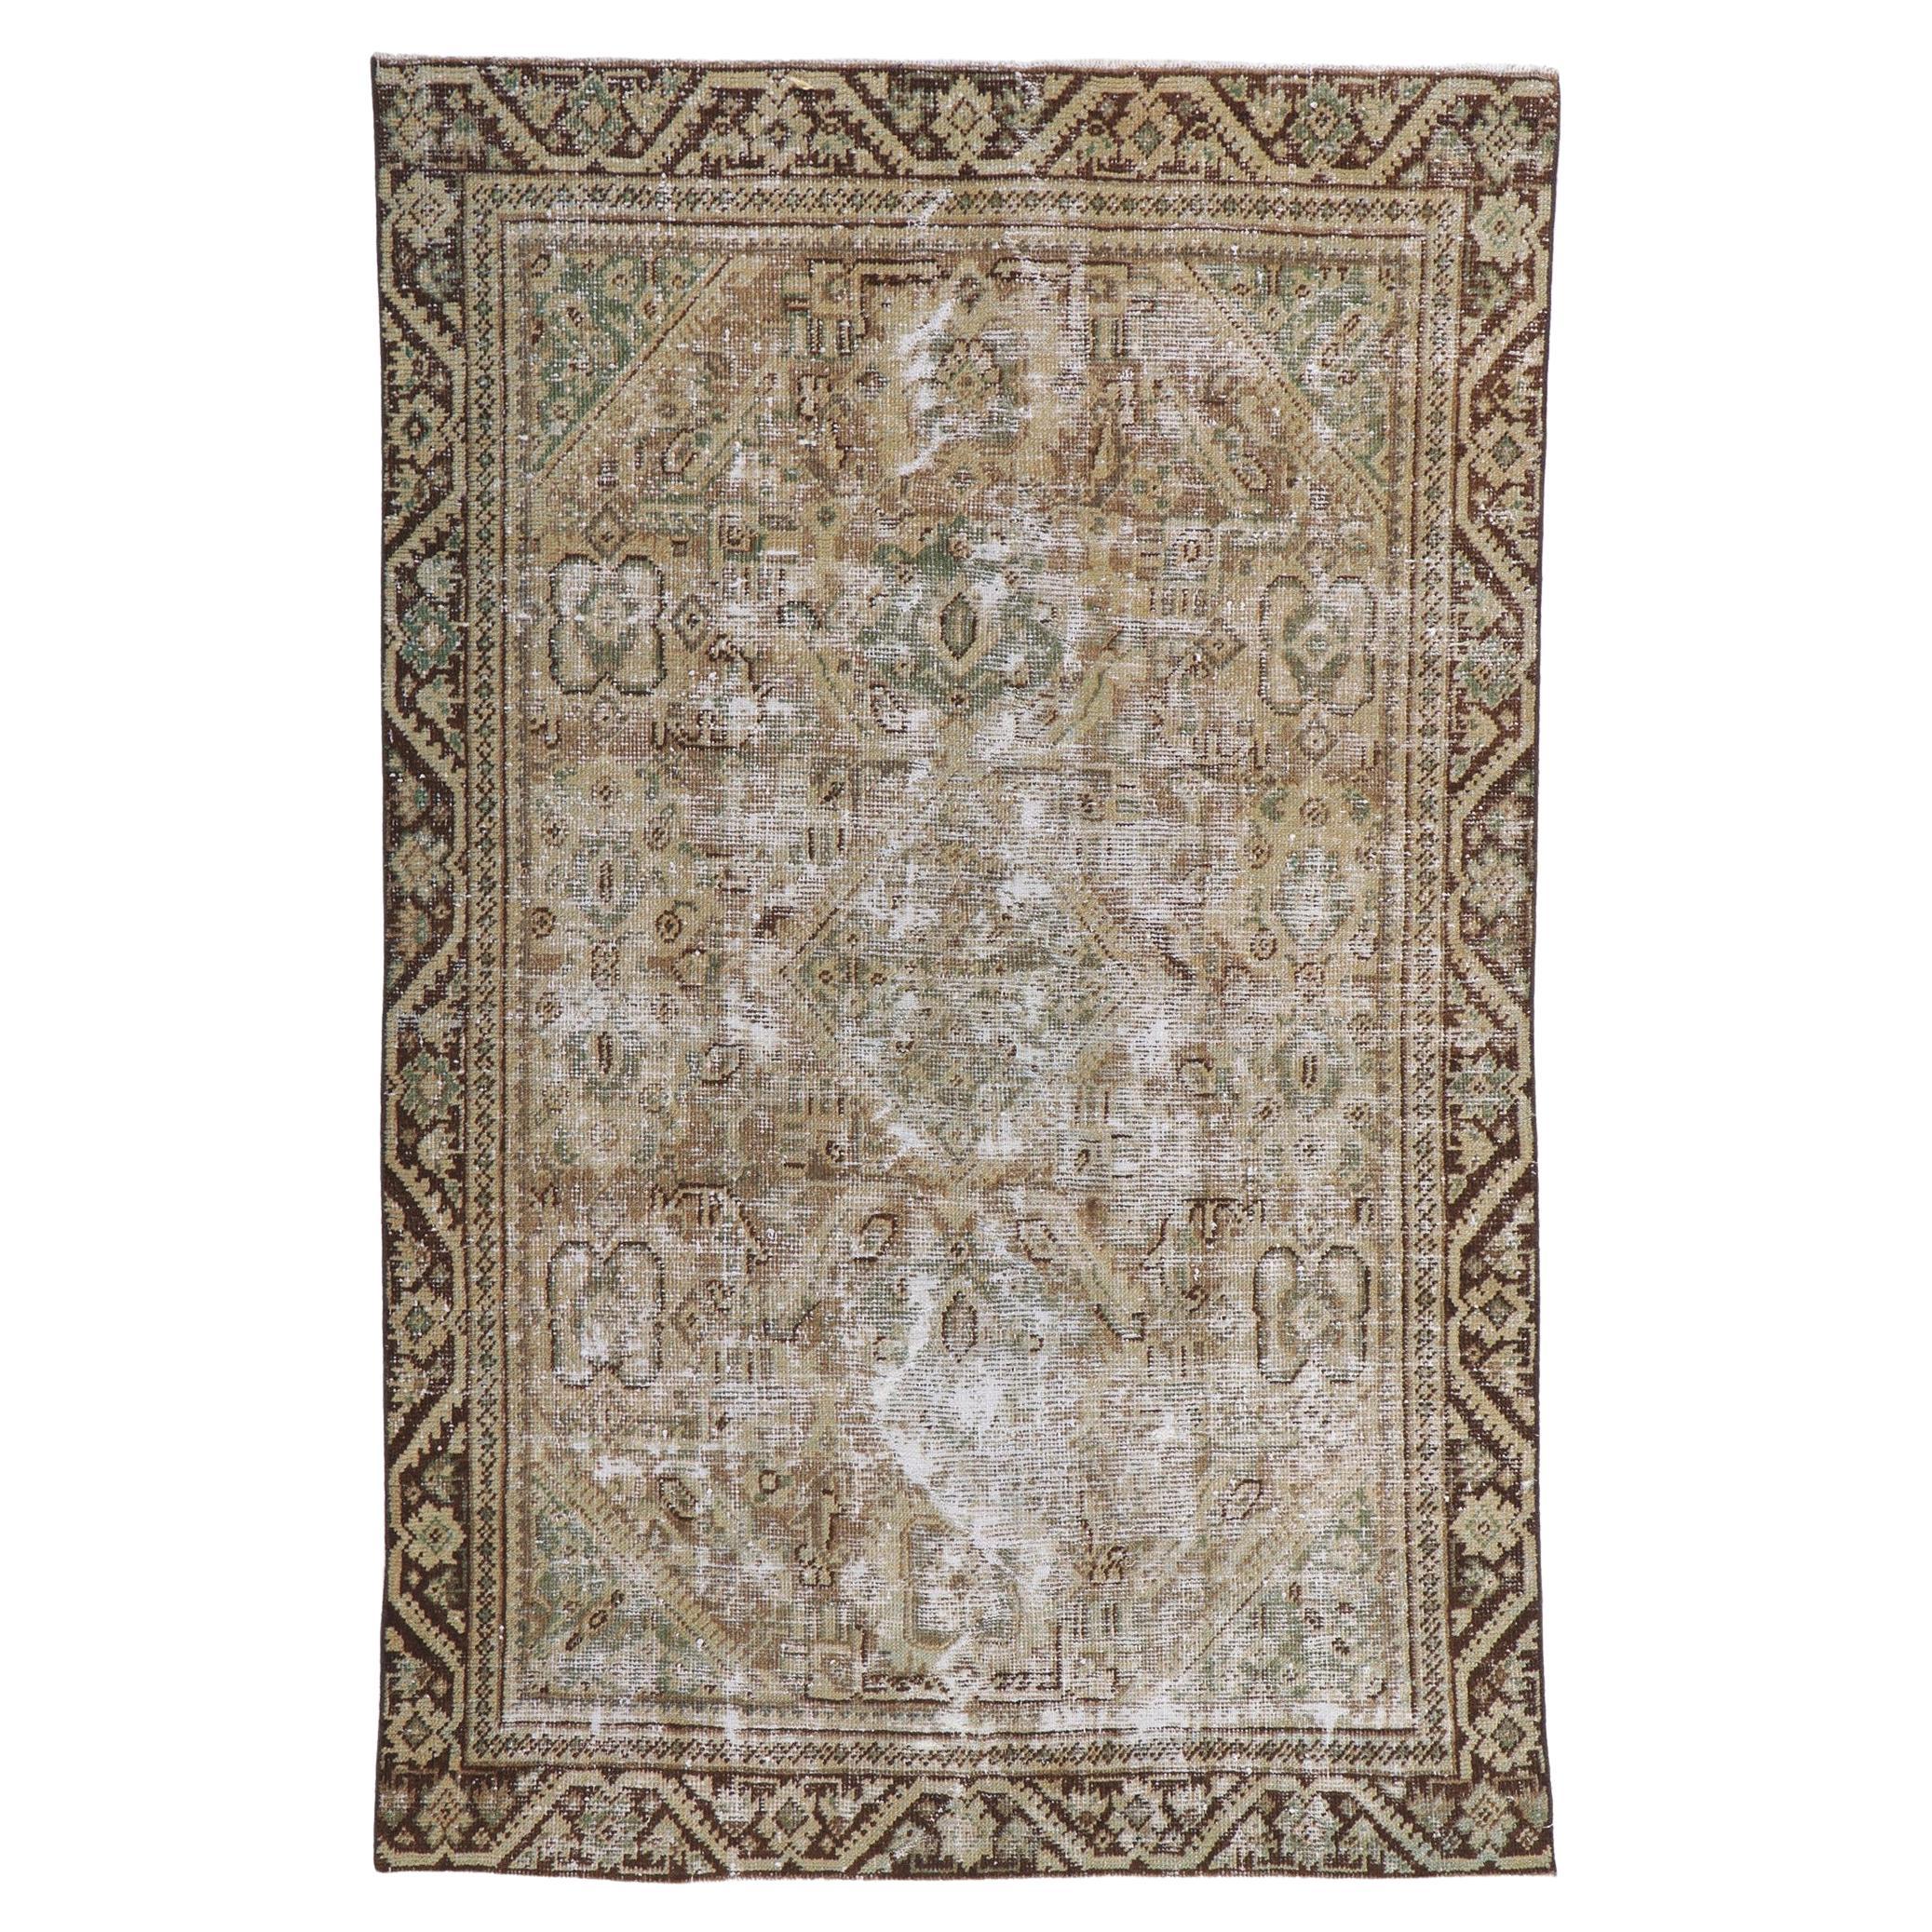 Weathered Distressed Antique Persian Mahal Rug